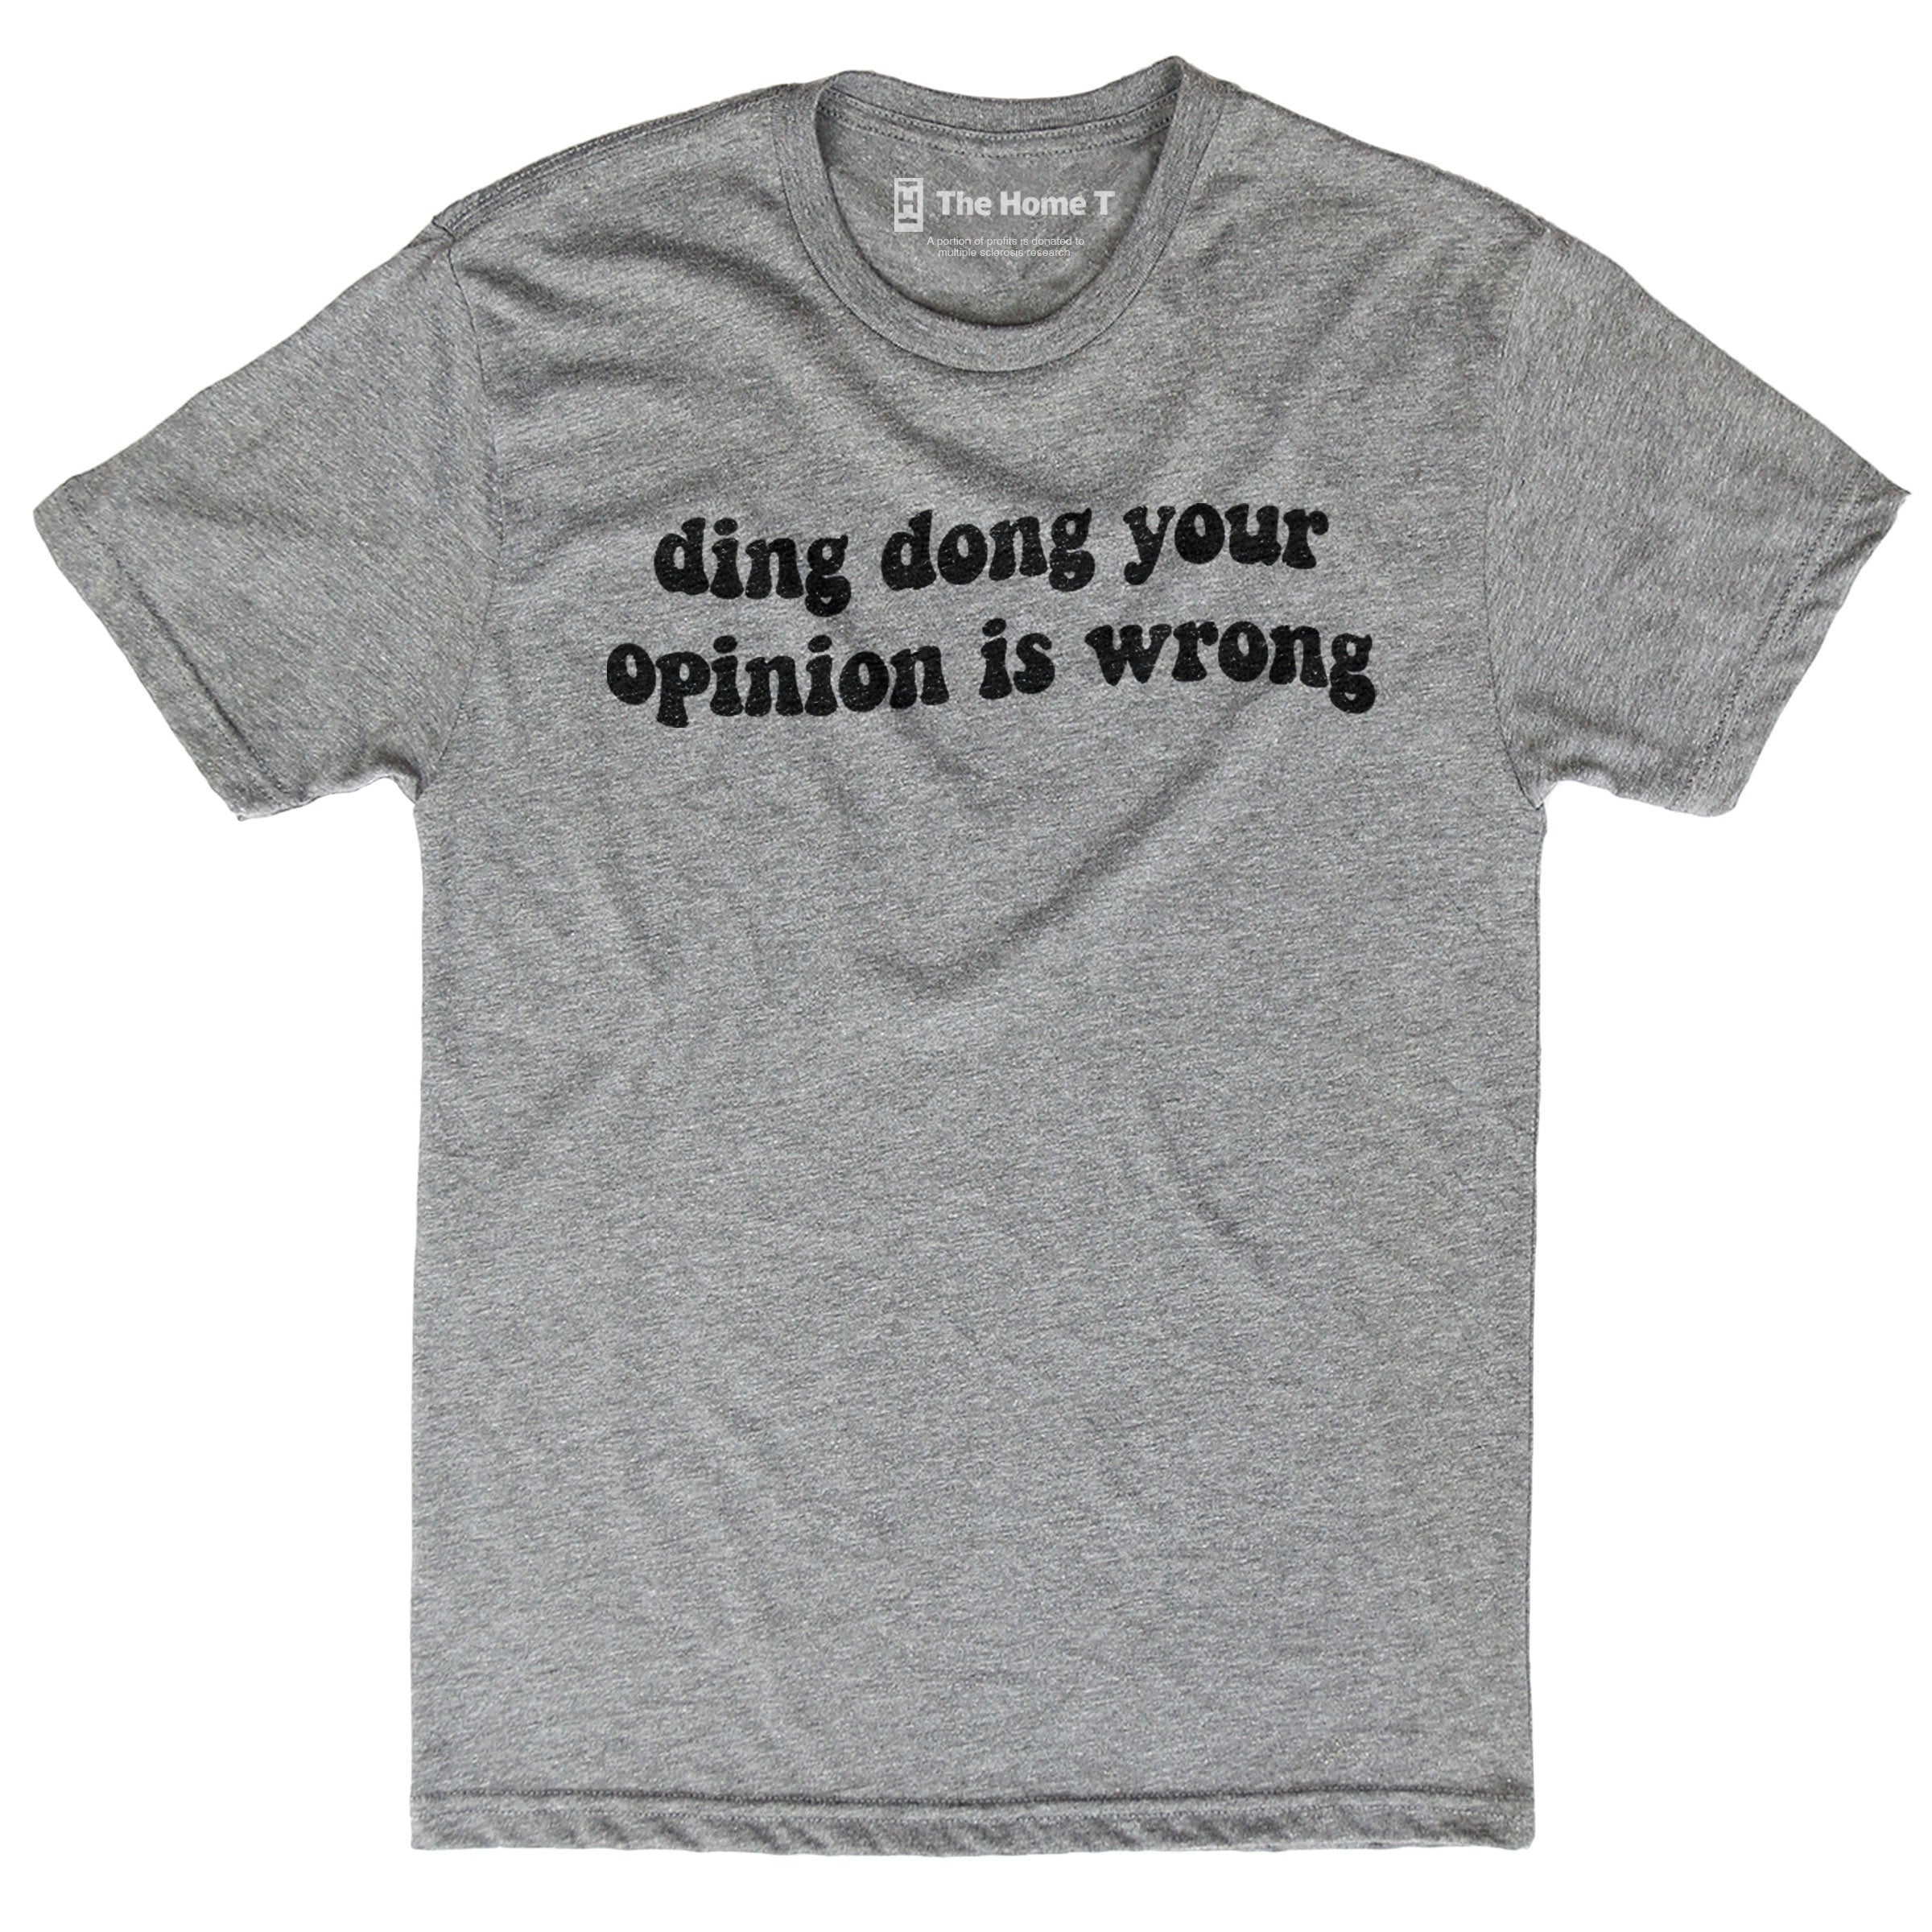 Ding Dong Your Opinion is Wrong